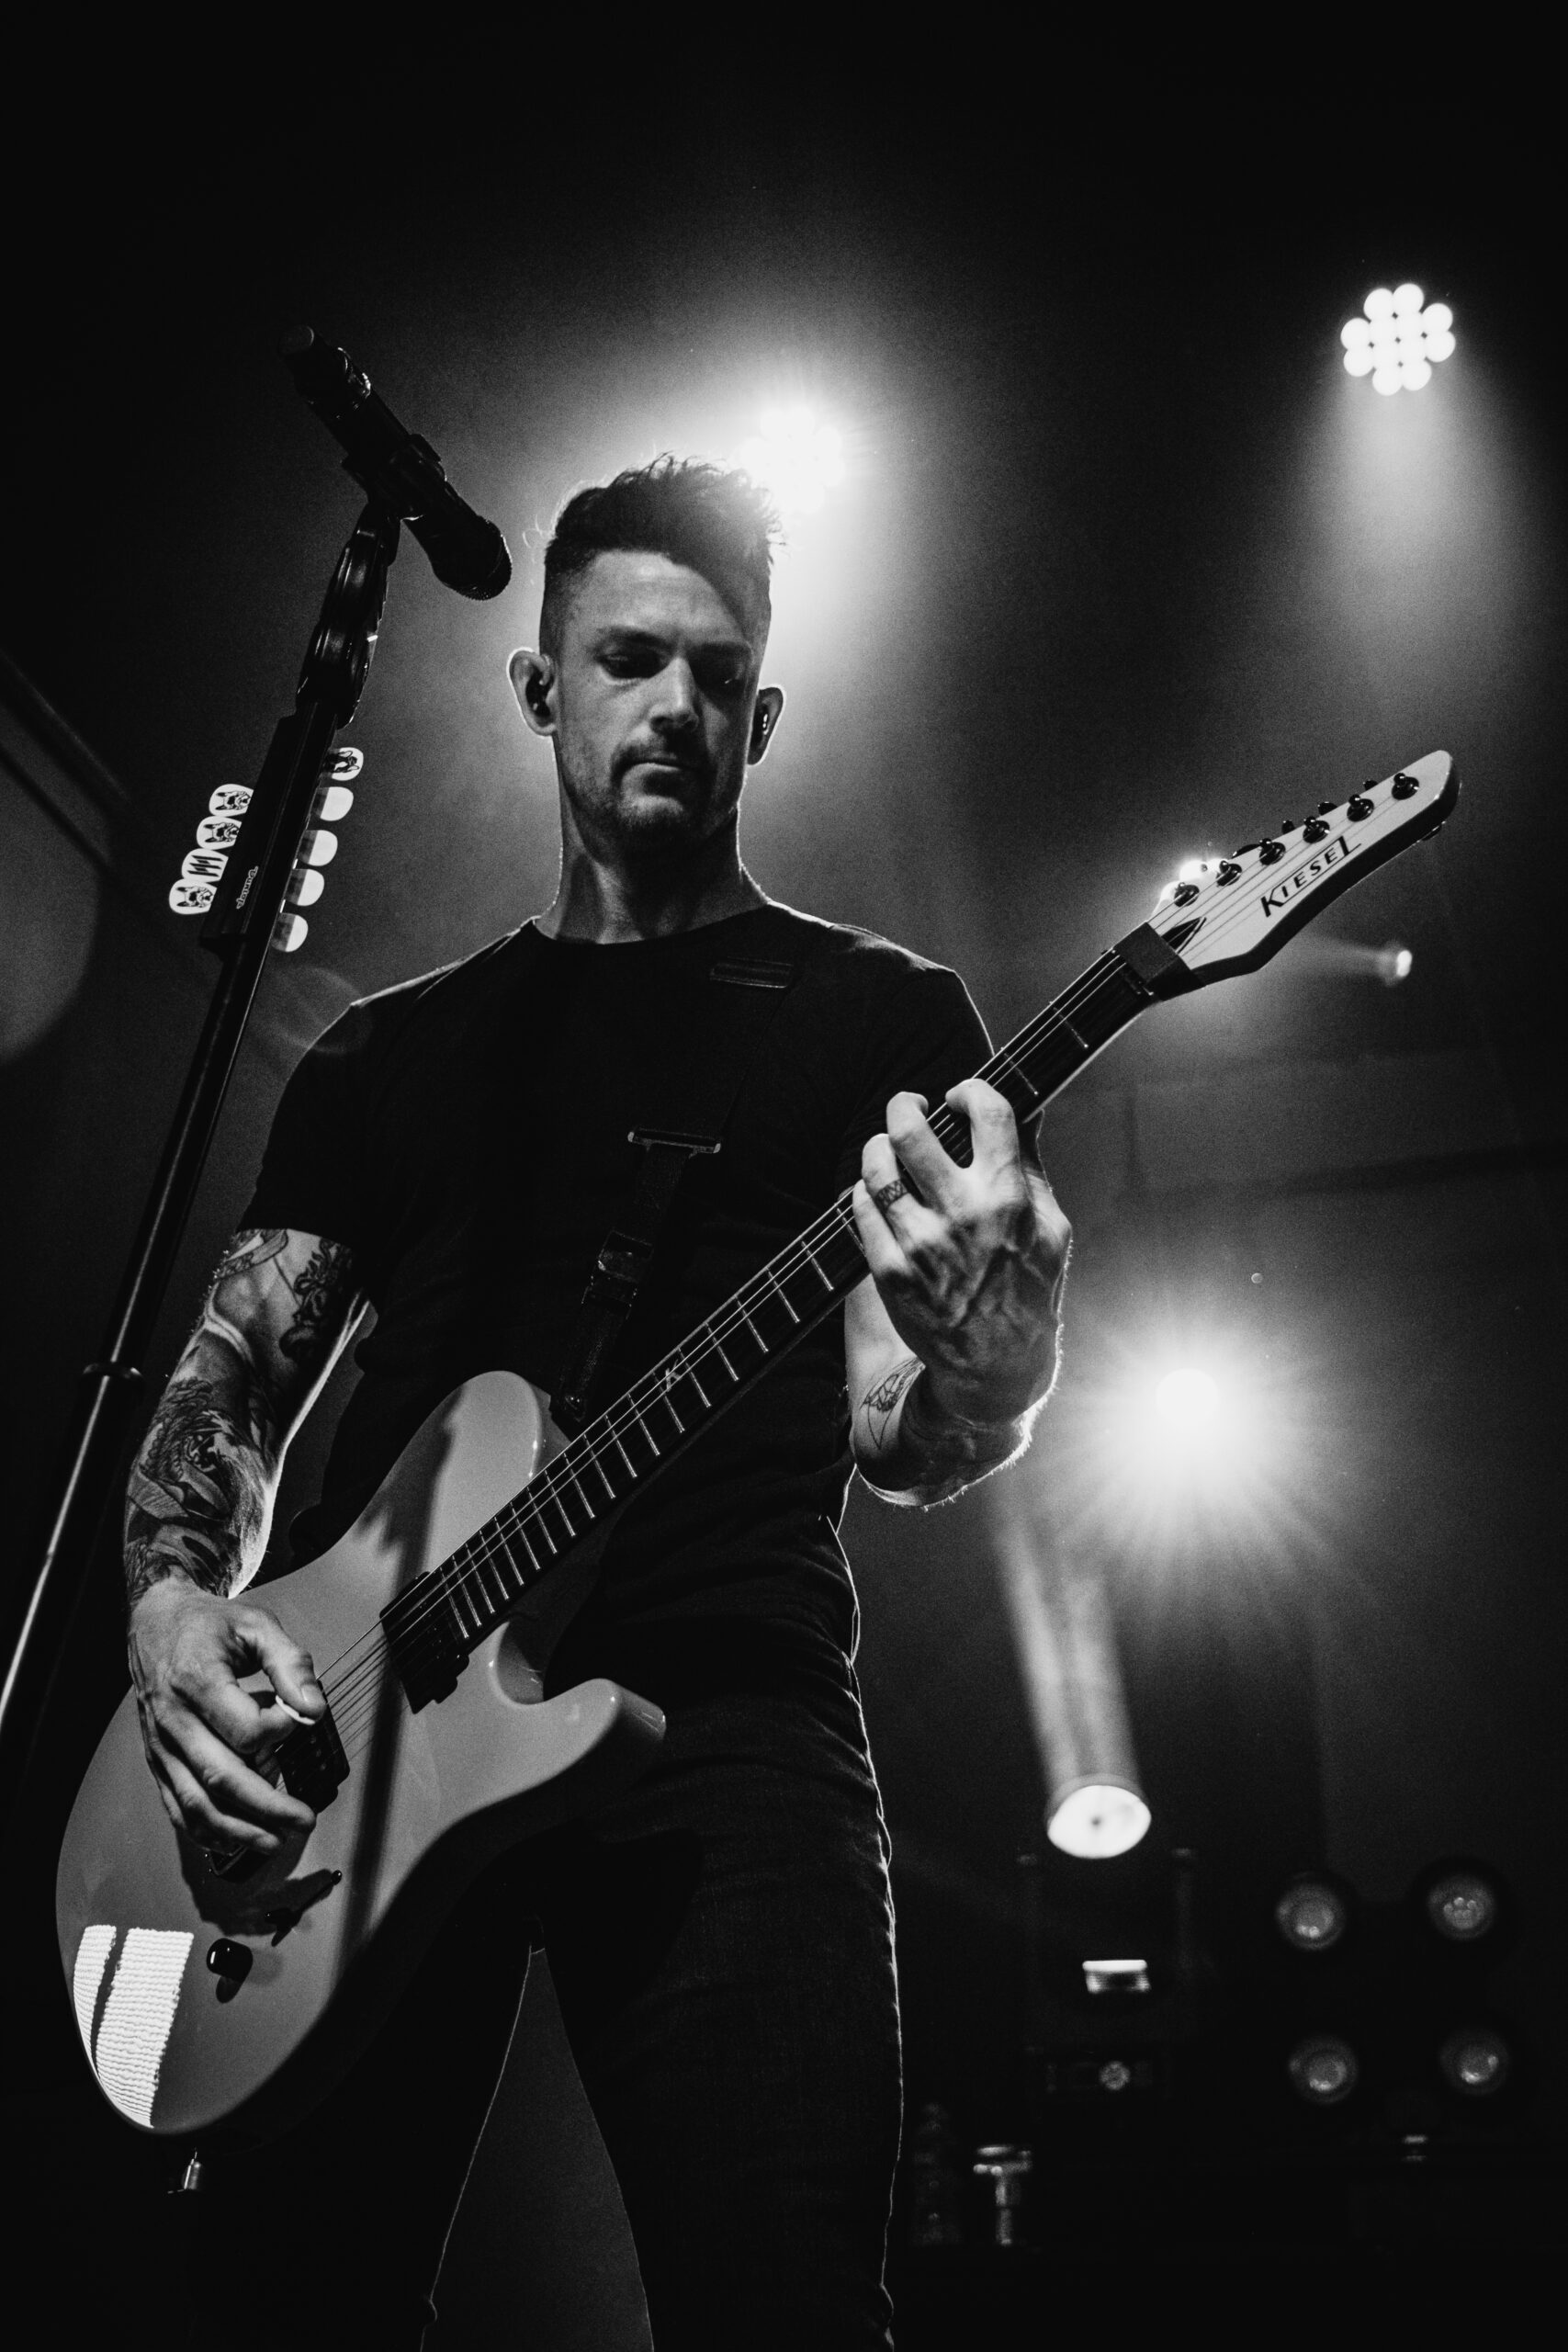 Memphis May Fire photo by Zak DeFreze for HM Magazine